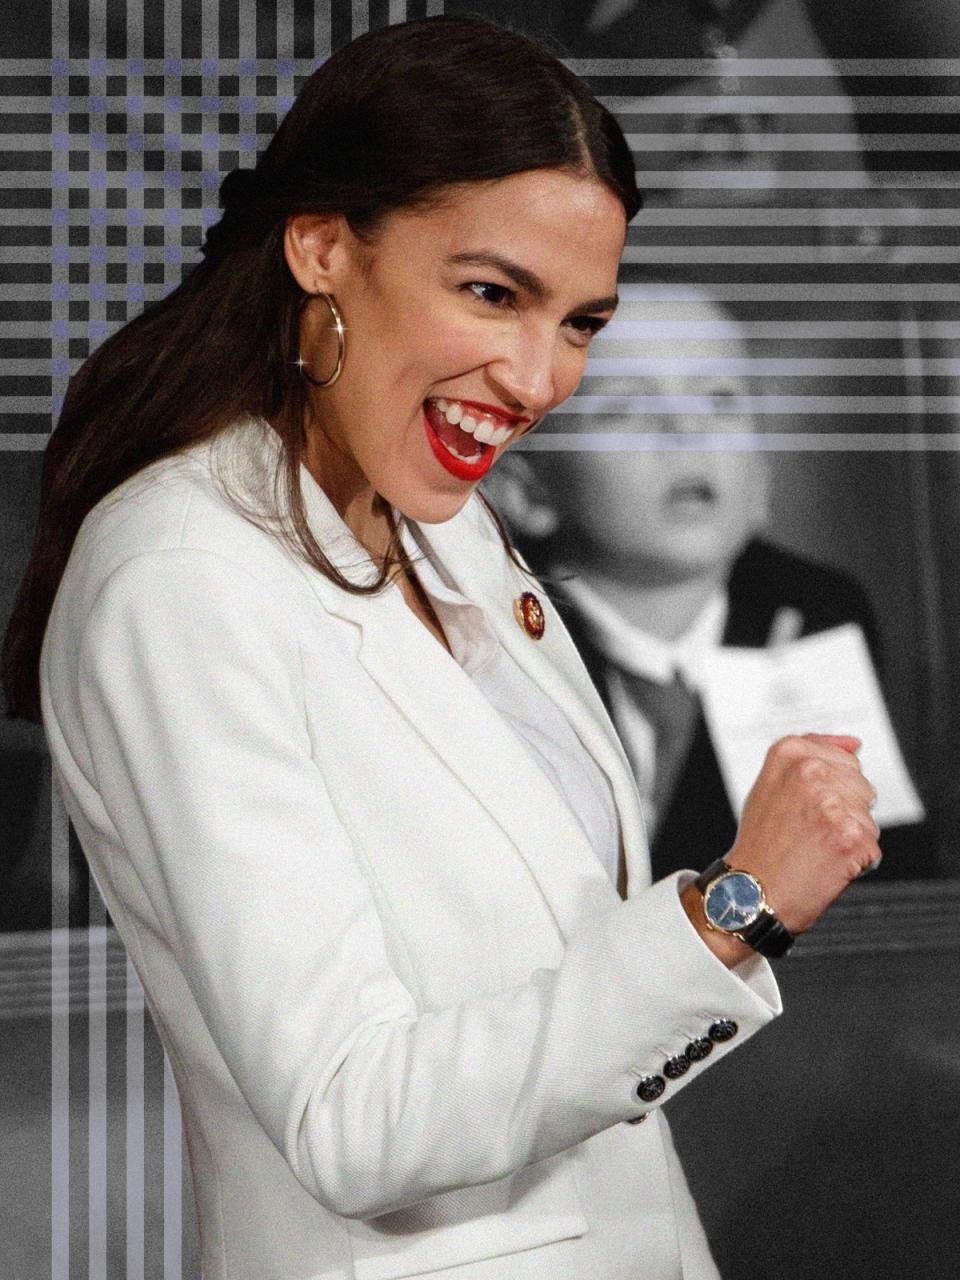 Why the congresswoman's best-known look—red lip and big gold hoops—really matters.